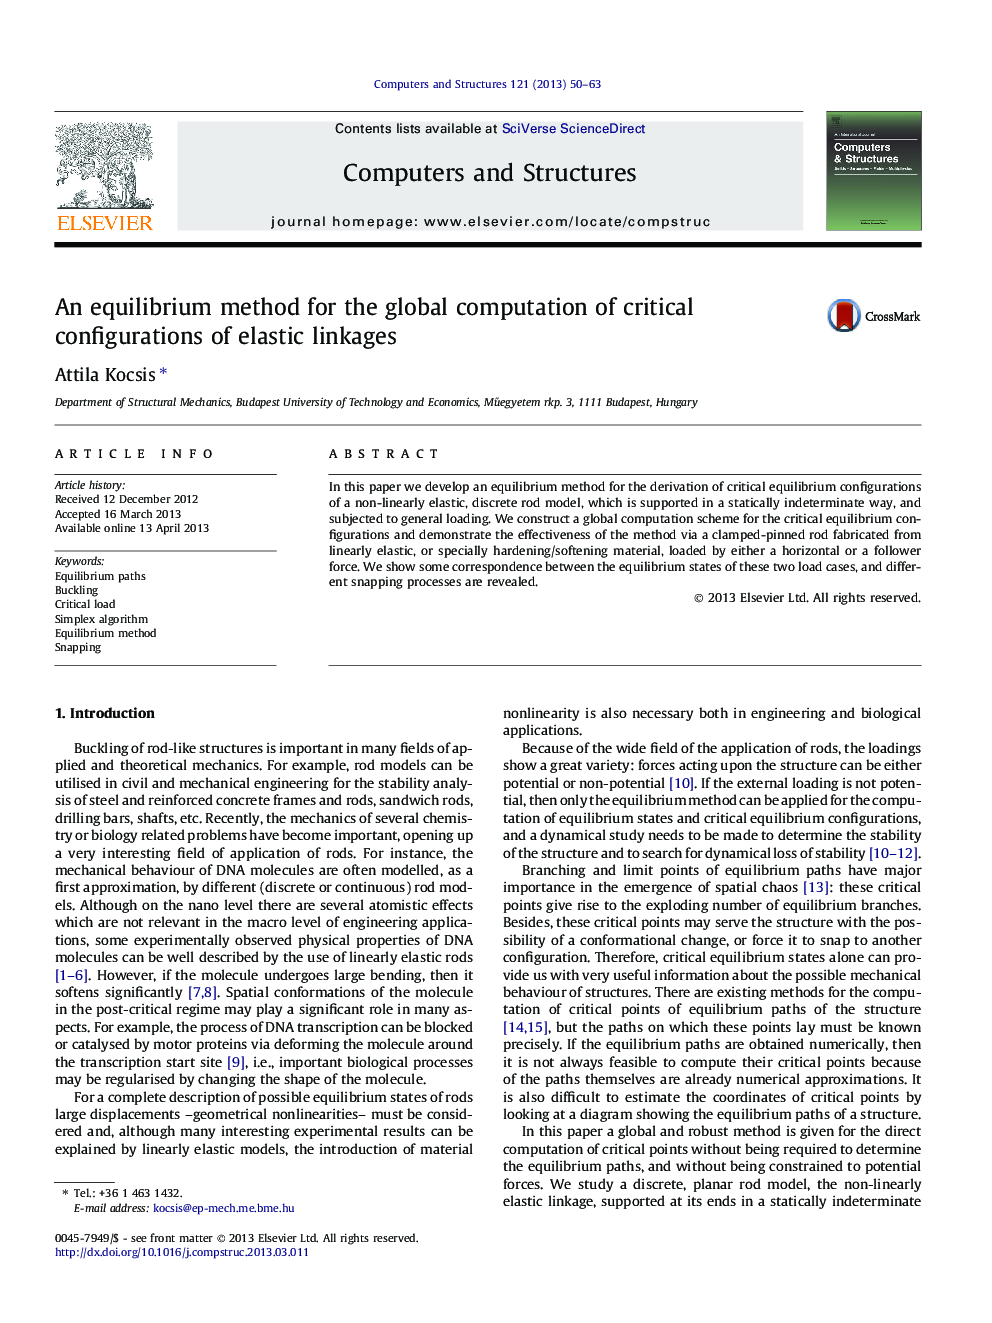 An equilibrium method for the global computation of critical configurations of elastic linkages